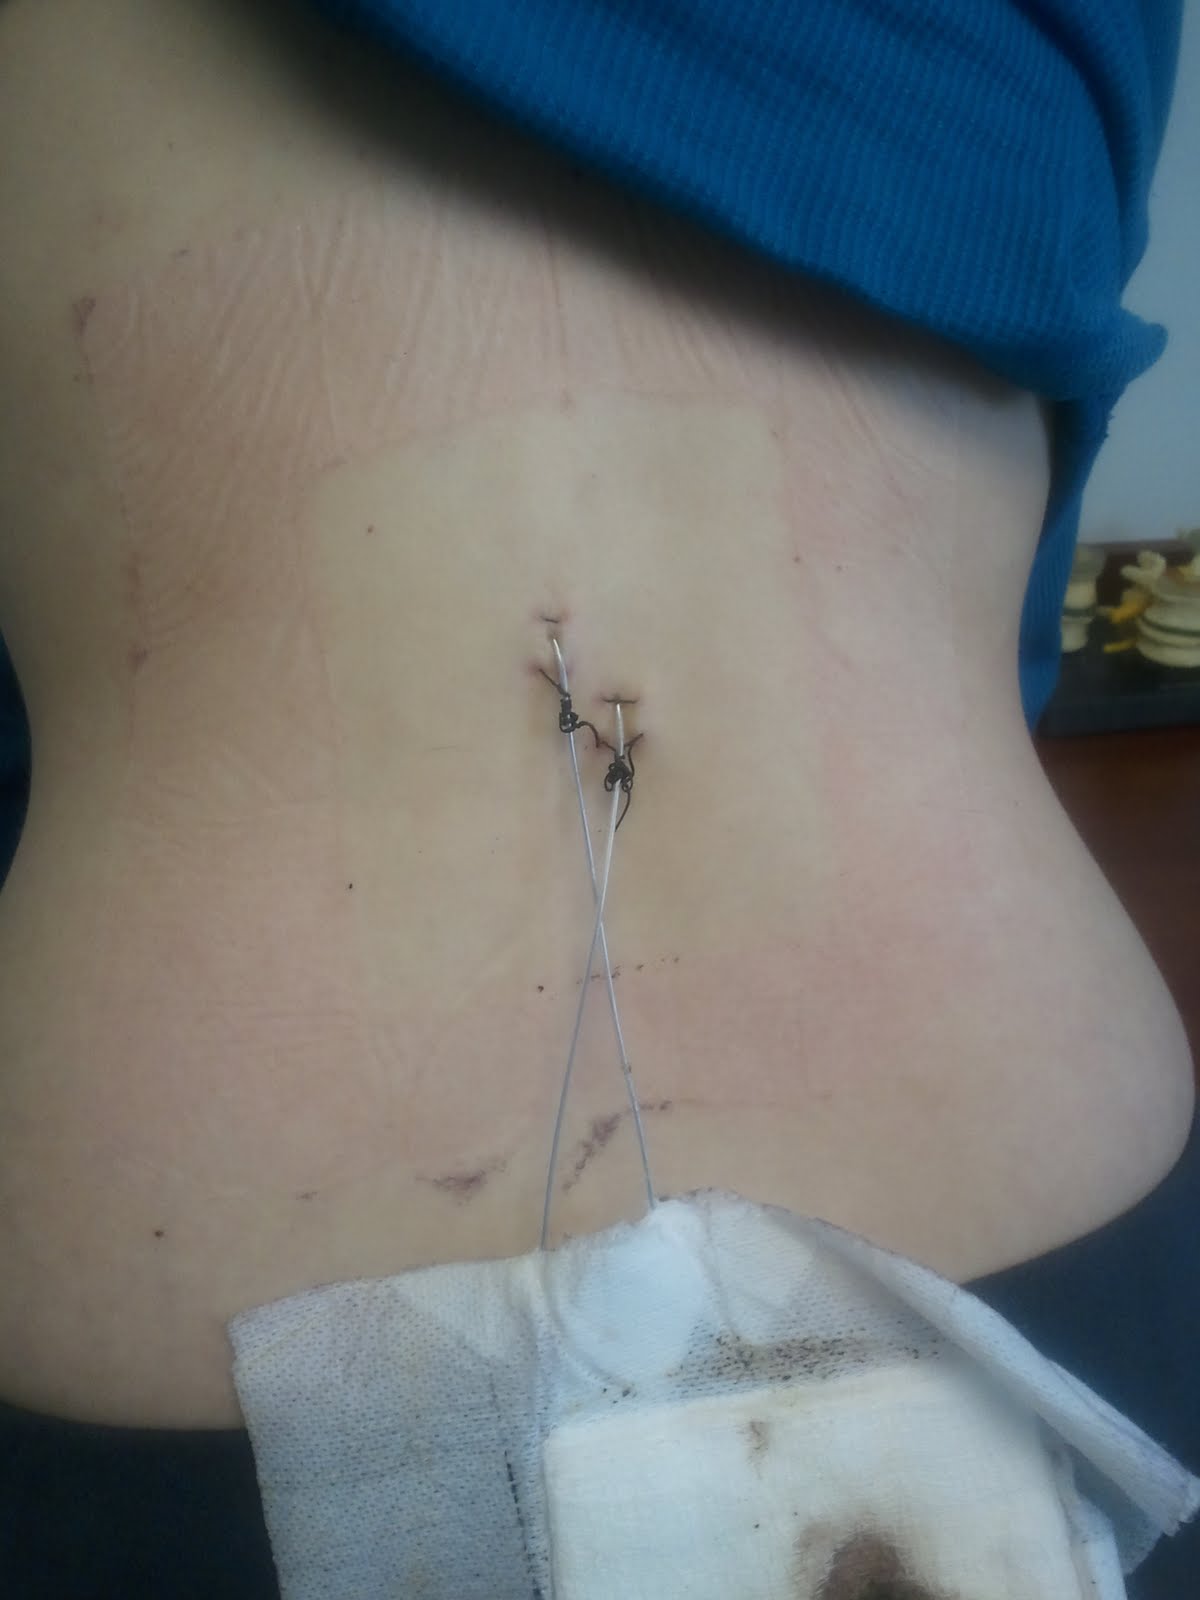 Under what circumstances is a trial of spinal cord stimulation considered for a patient?